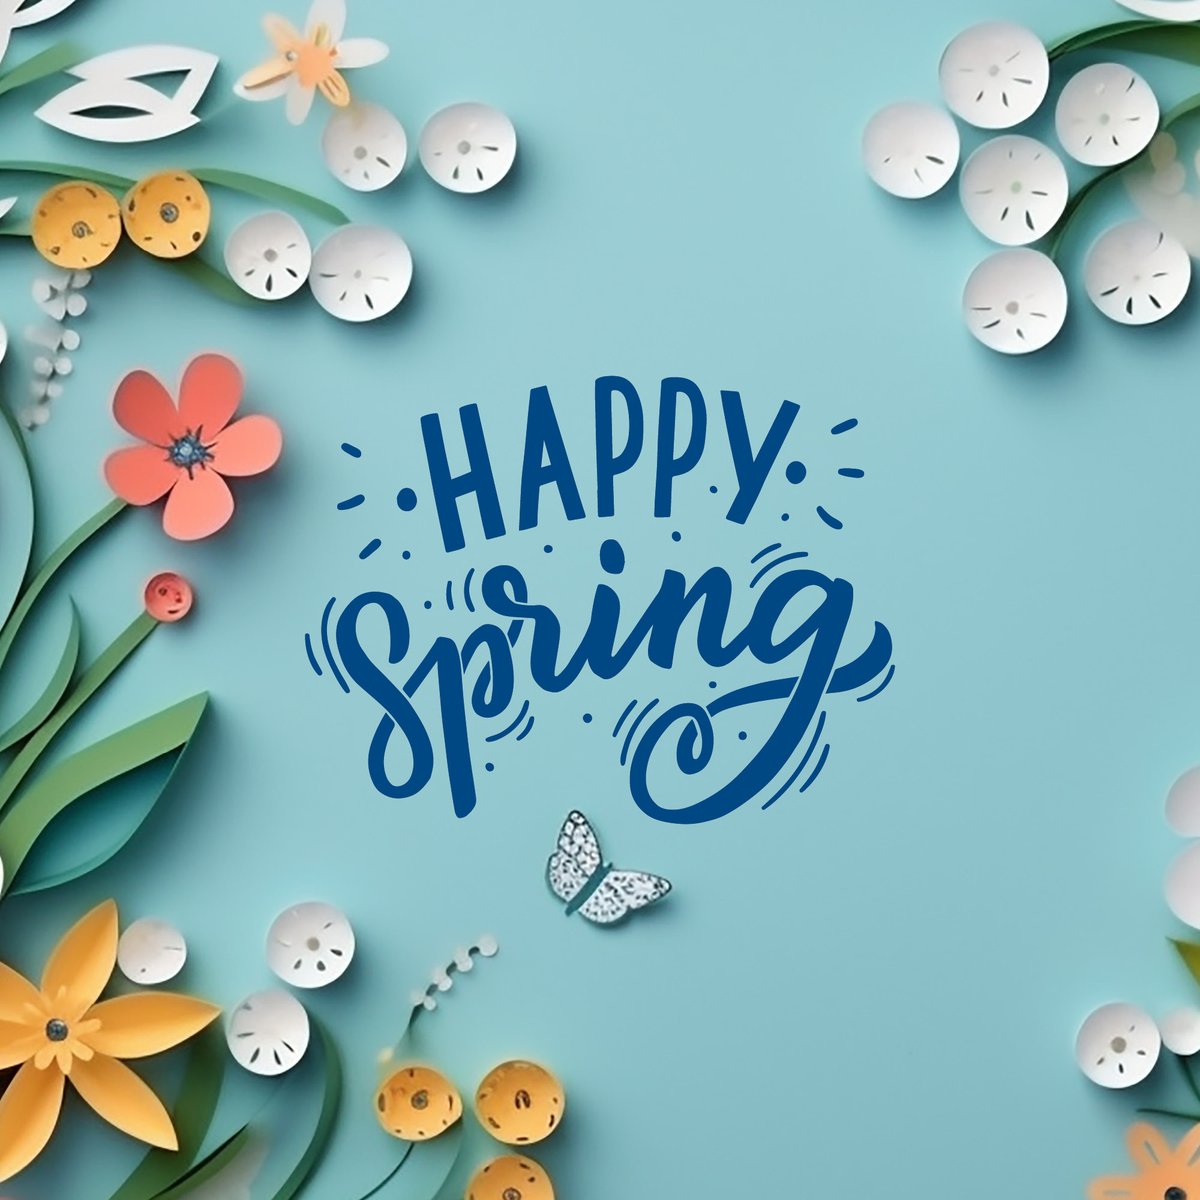 The @NemetschekGroup wishes everyone a great start to spring - and happy Easter holidays to those who celebrate!